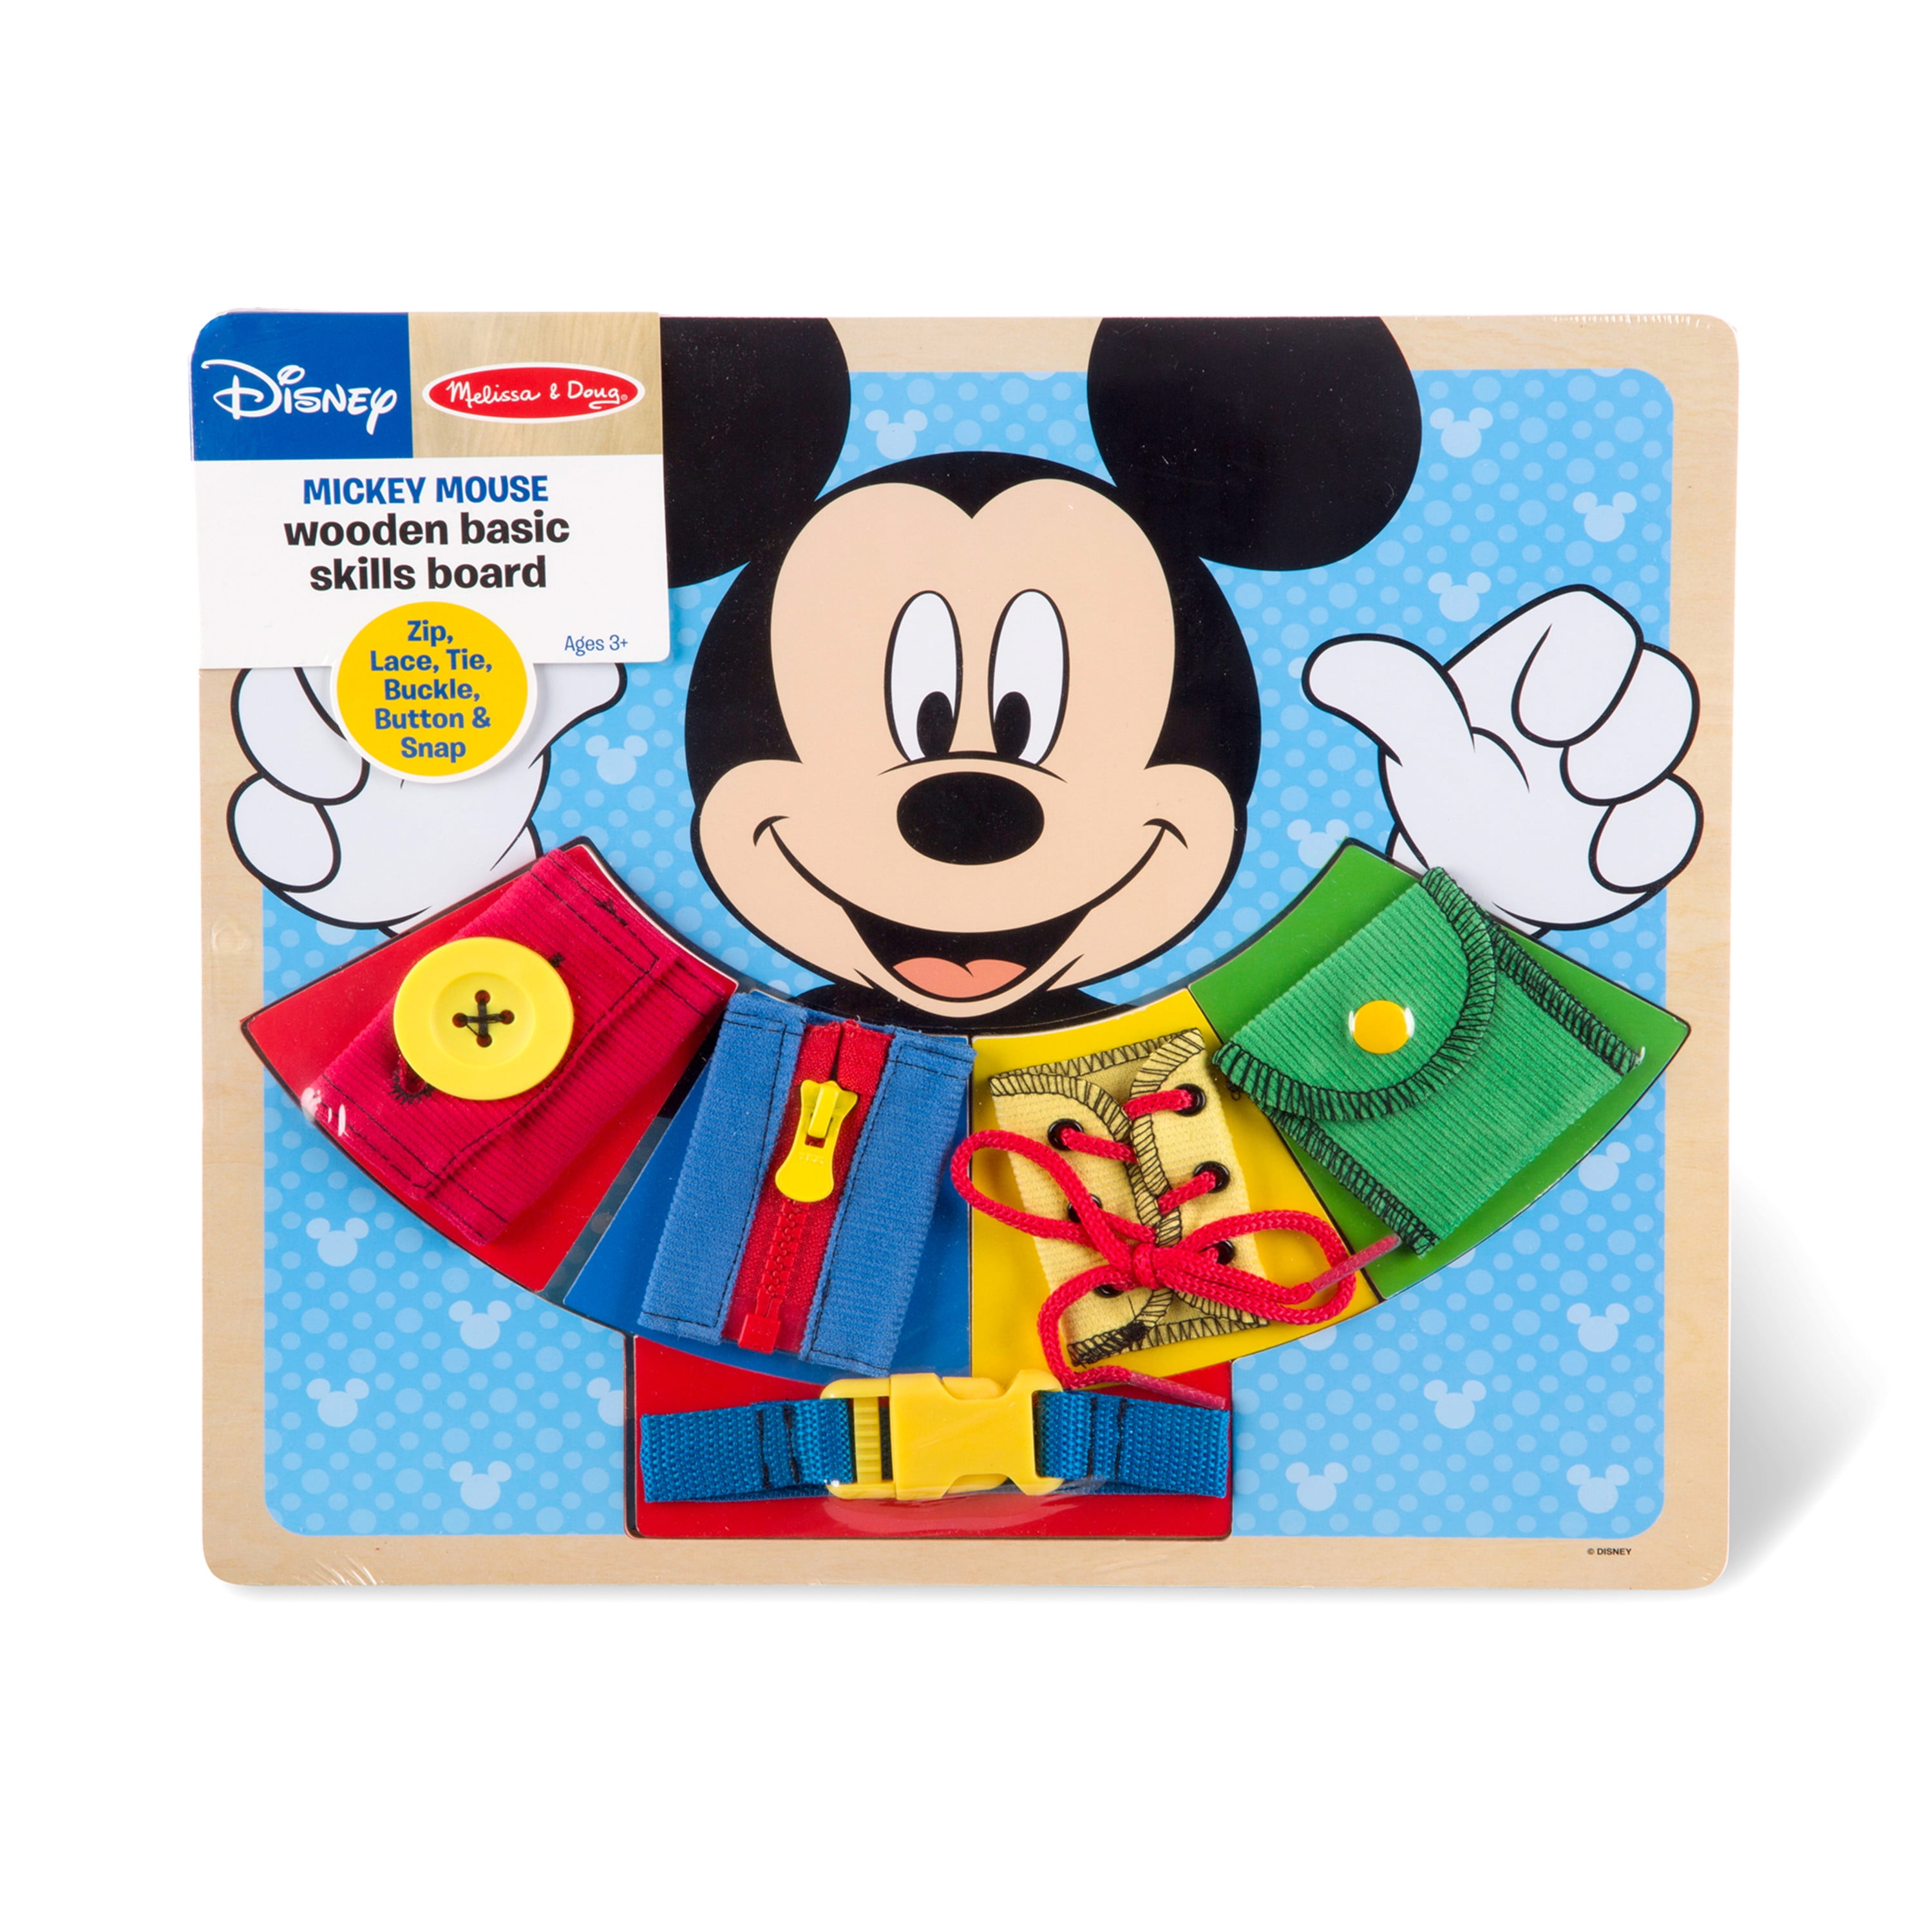 Melissa and Doug Minnie Mouse wooden basic skills board. 